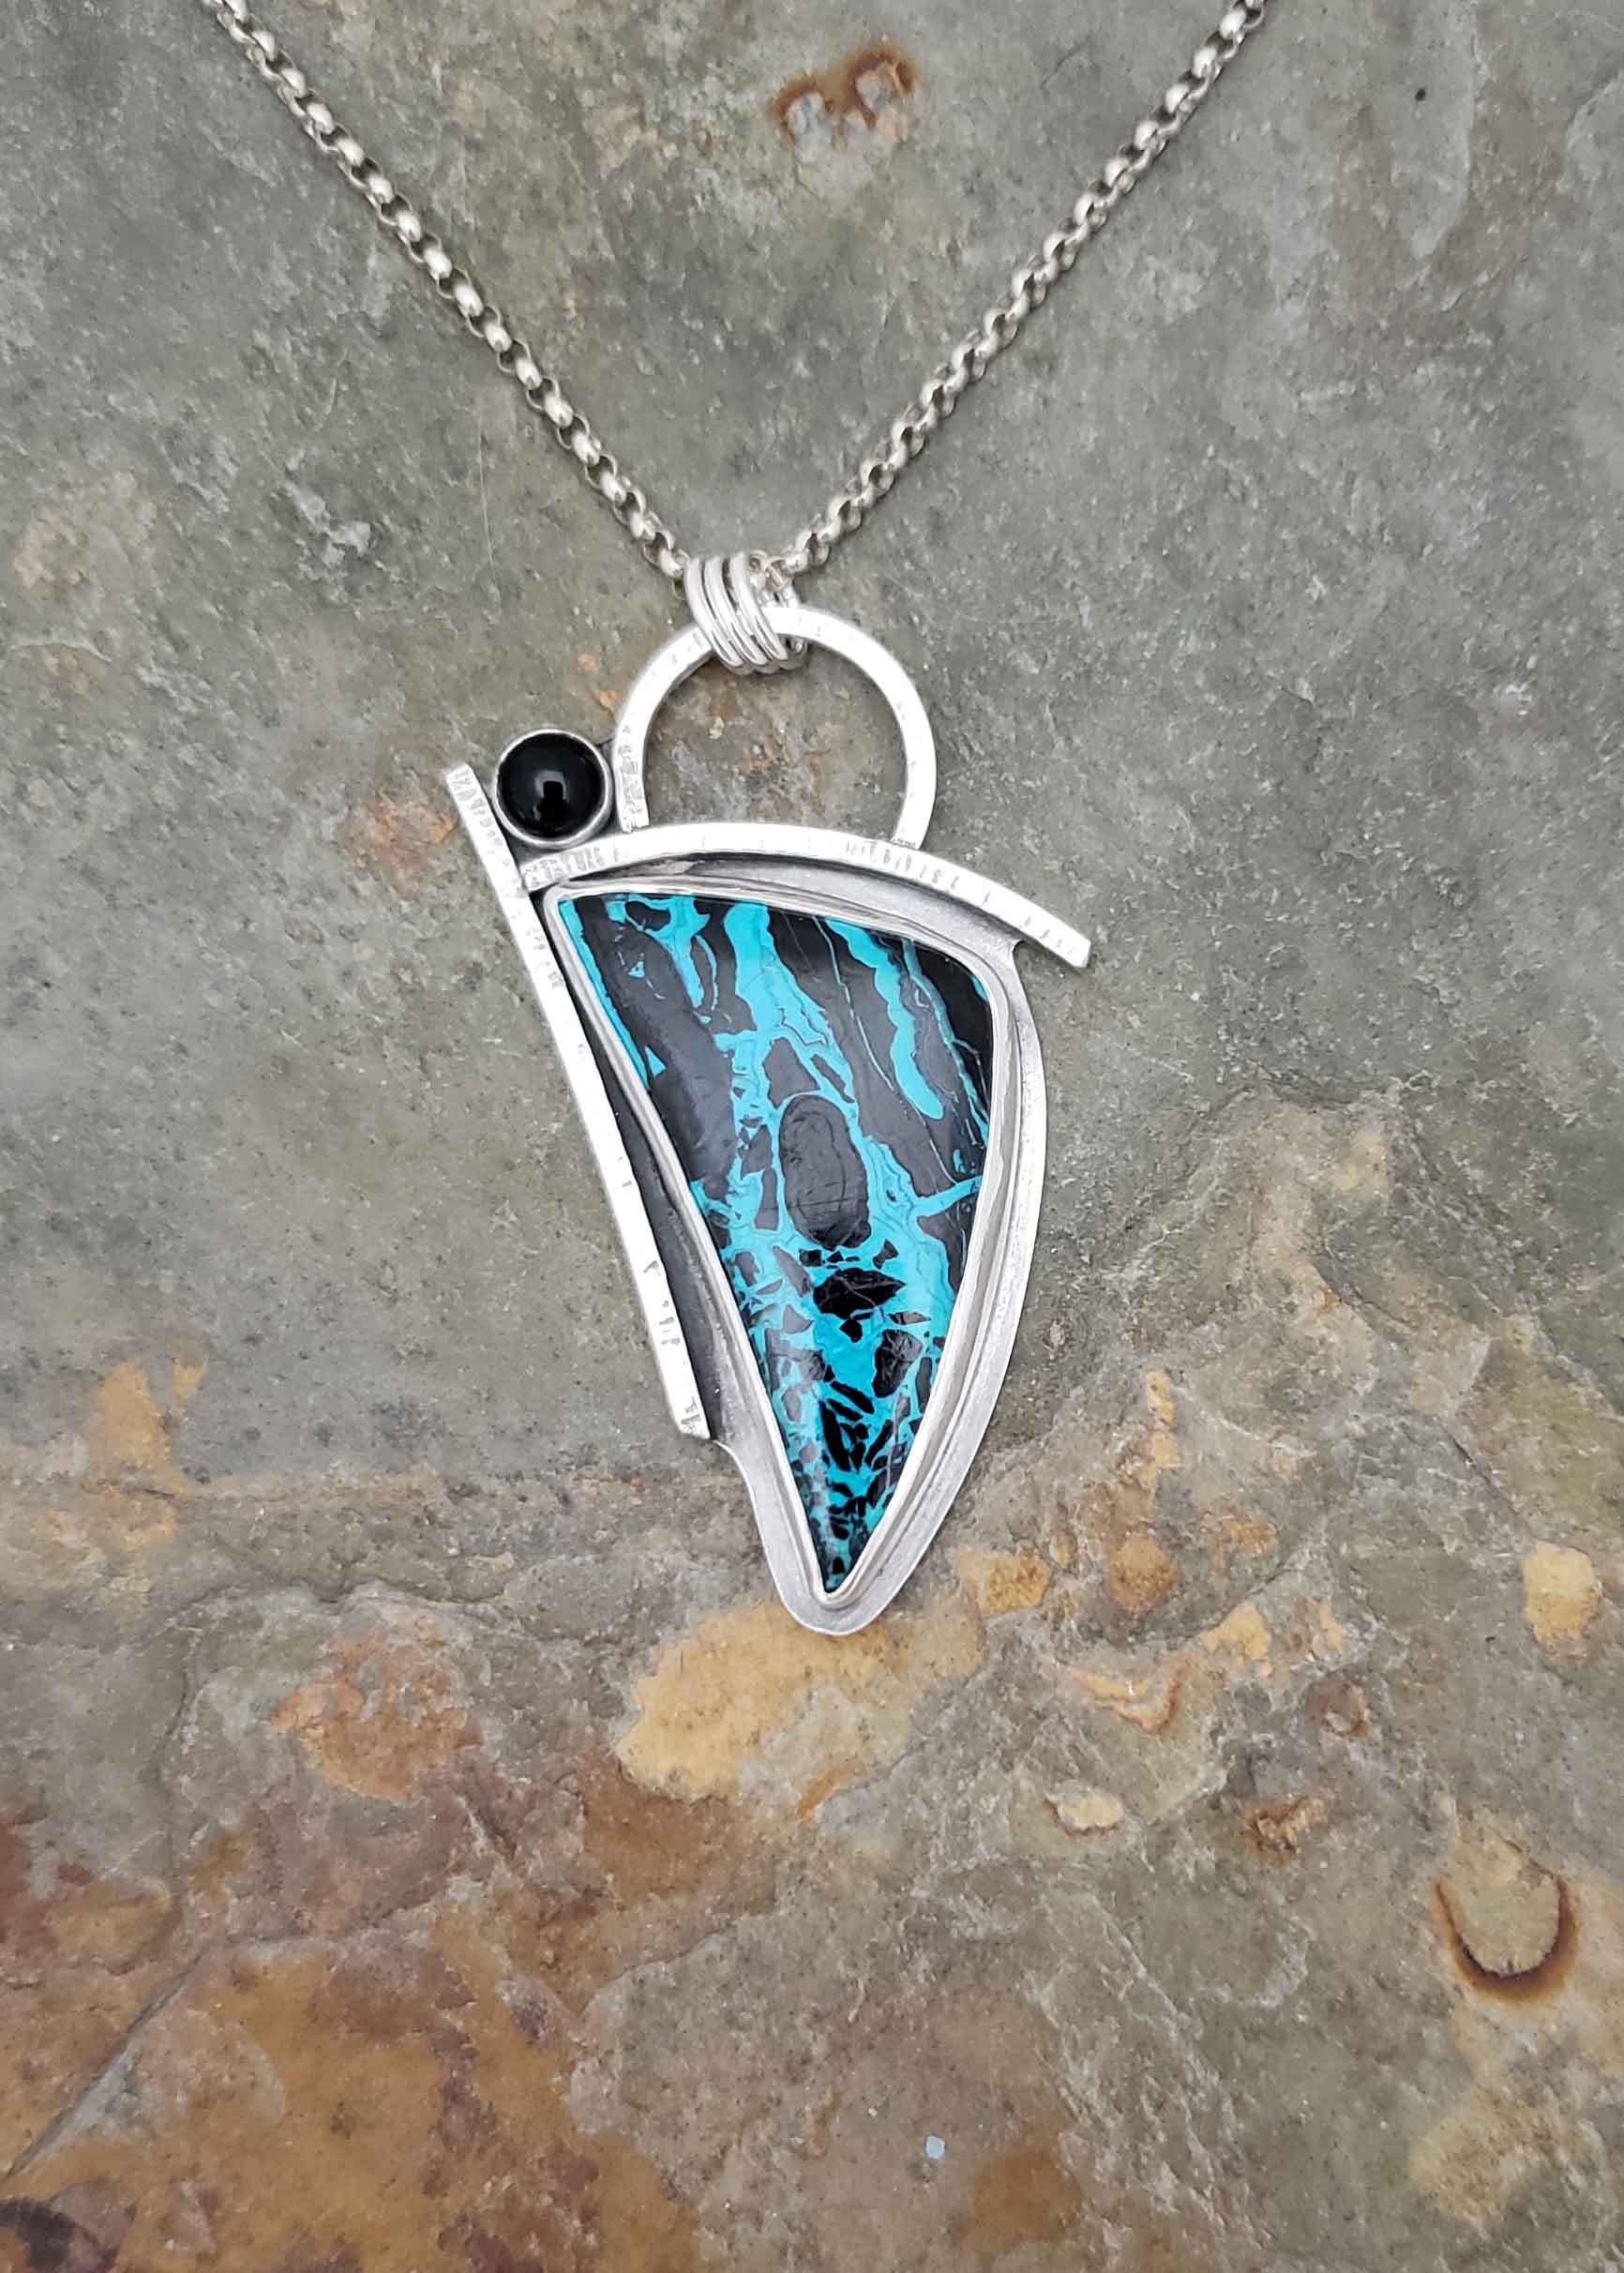 Dramatic blue and black silver pendant by Dona Miller.